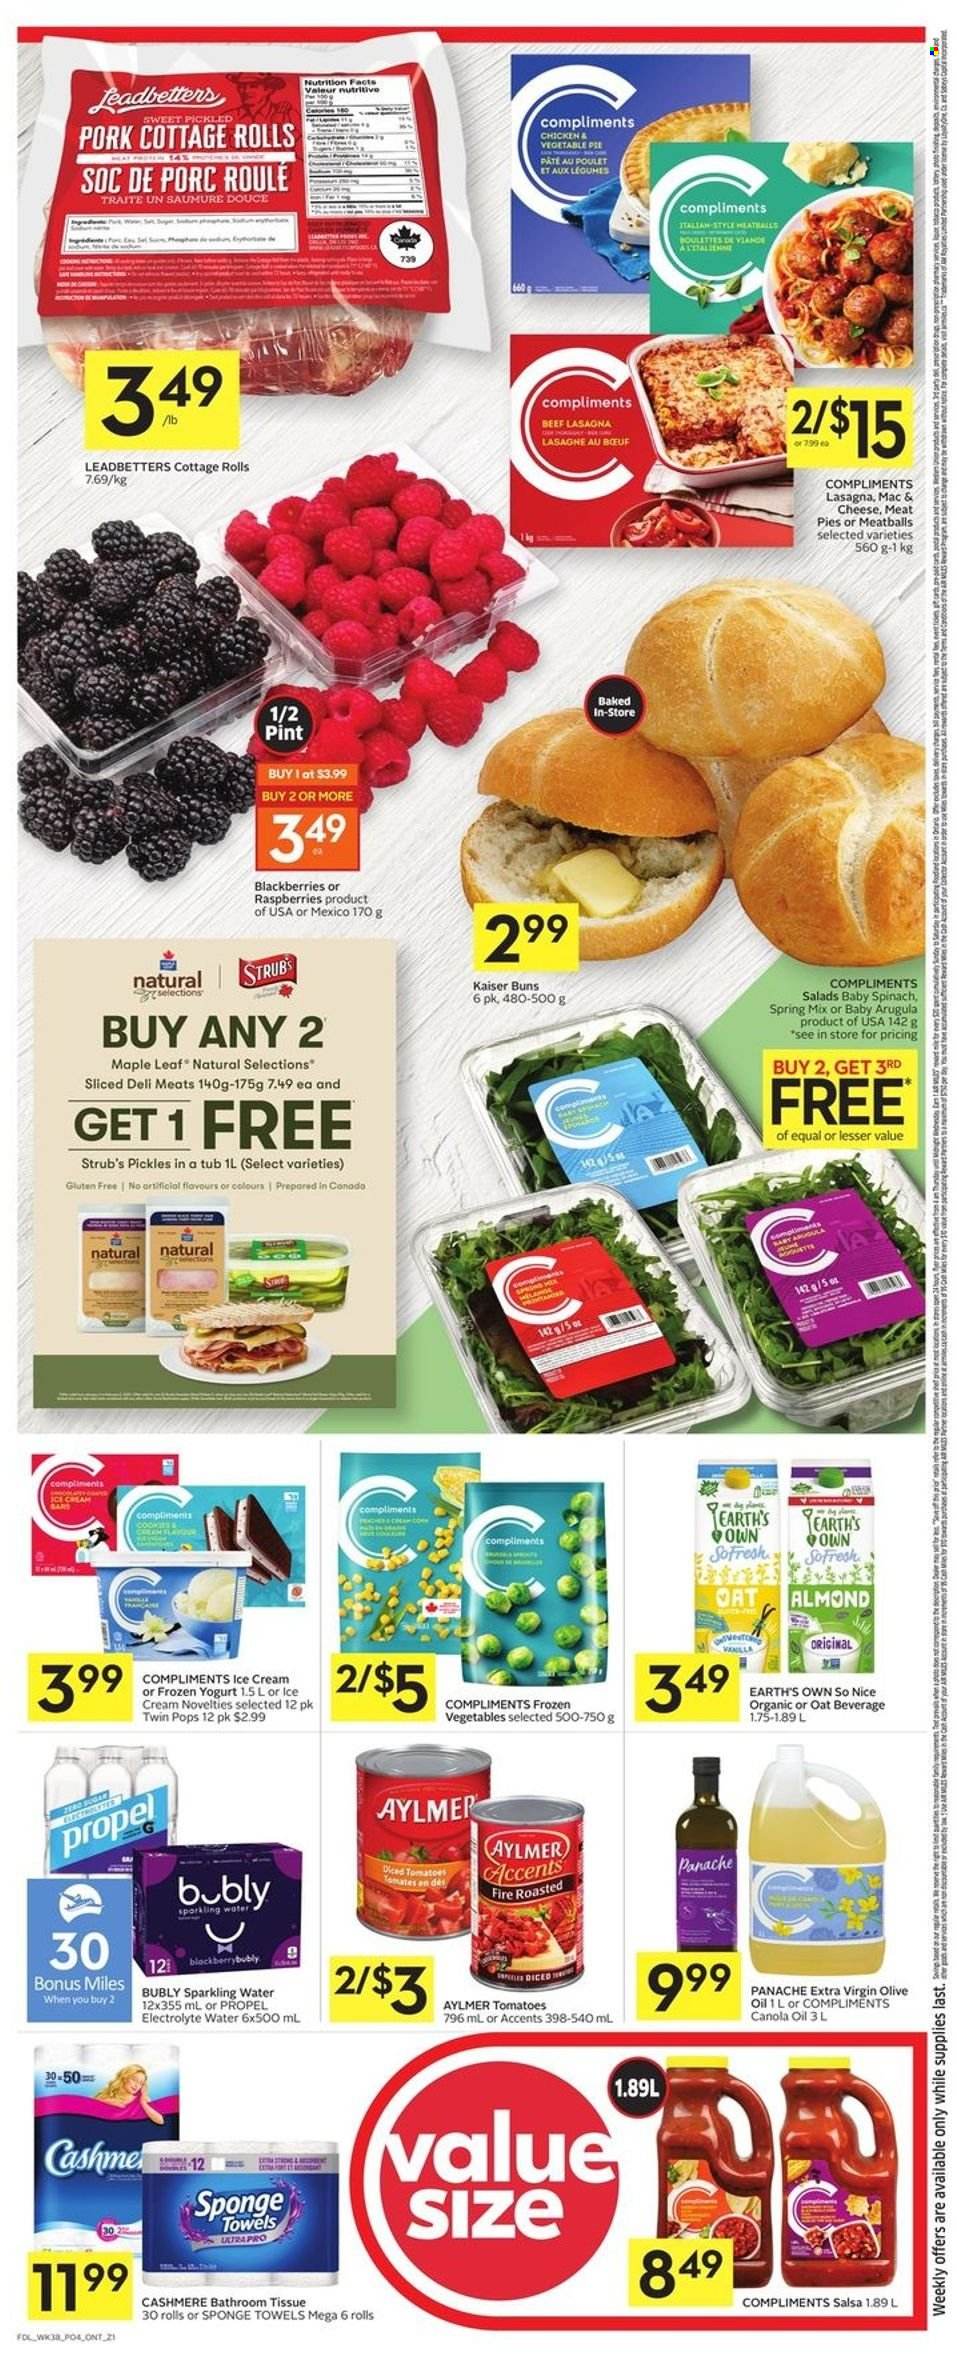 thumbnail - Foodland Flyer - January 13, 2022 - January 19, 2022 - Sales products - pie, buns, arugula, spinach, tomatoes, blackberries, meatballs, lasagna meal, yoghurt, ice cream, frozen vegetables, pickles, salsa, canola oil, extra virgin olive oil, olive oil, oil, sparkling water, So Nice. Page 6.